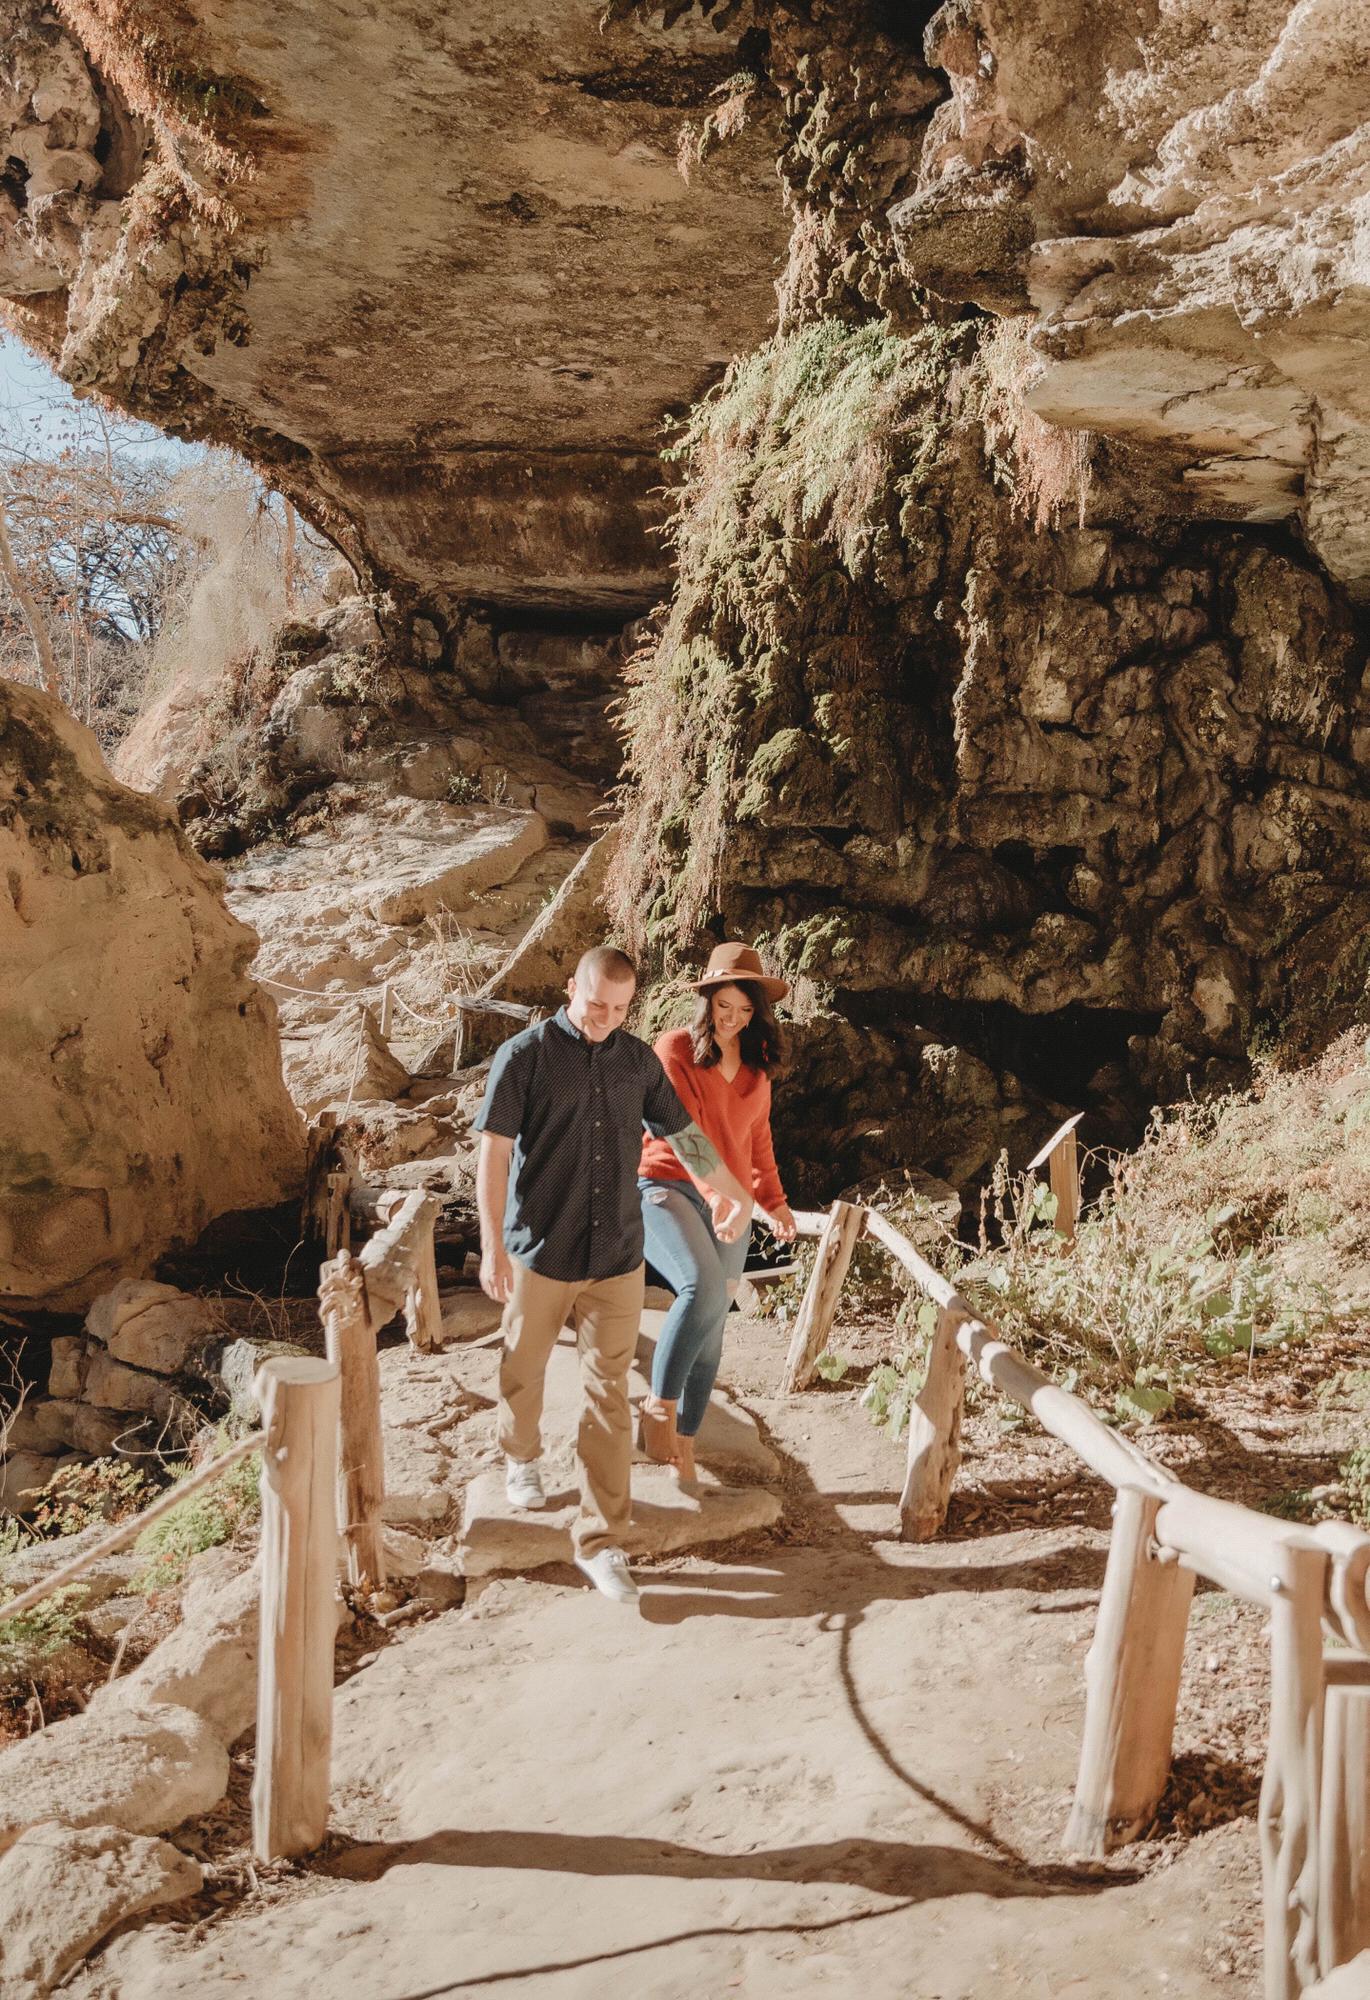 Hope y’all enjoy some photos from our Save The Date session at Hamilton Pool Preserve. Would we even be us if we didn’t get in the waterfall and pop a bottle of champagne to end the shoot?